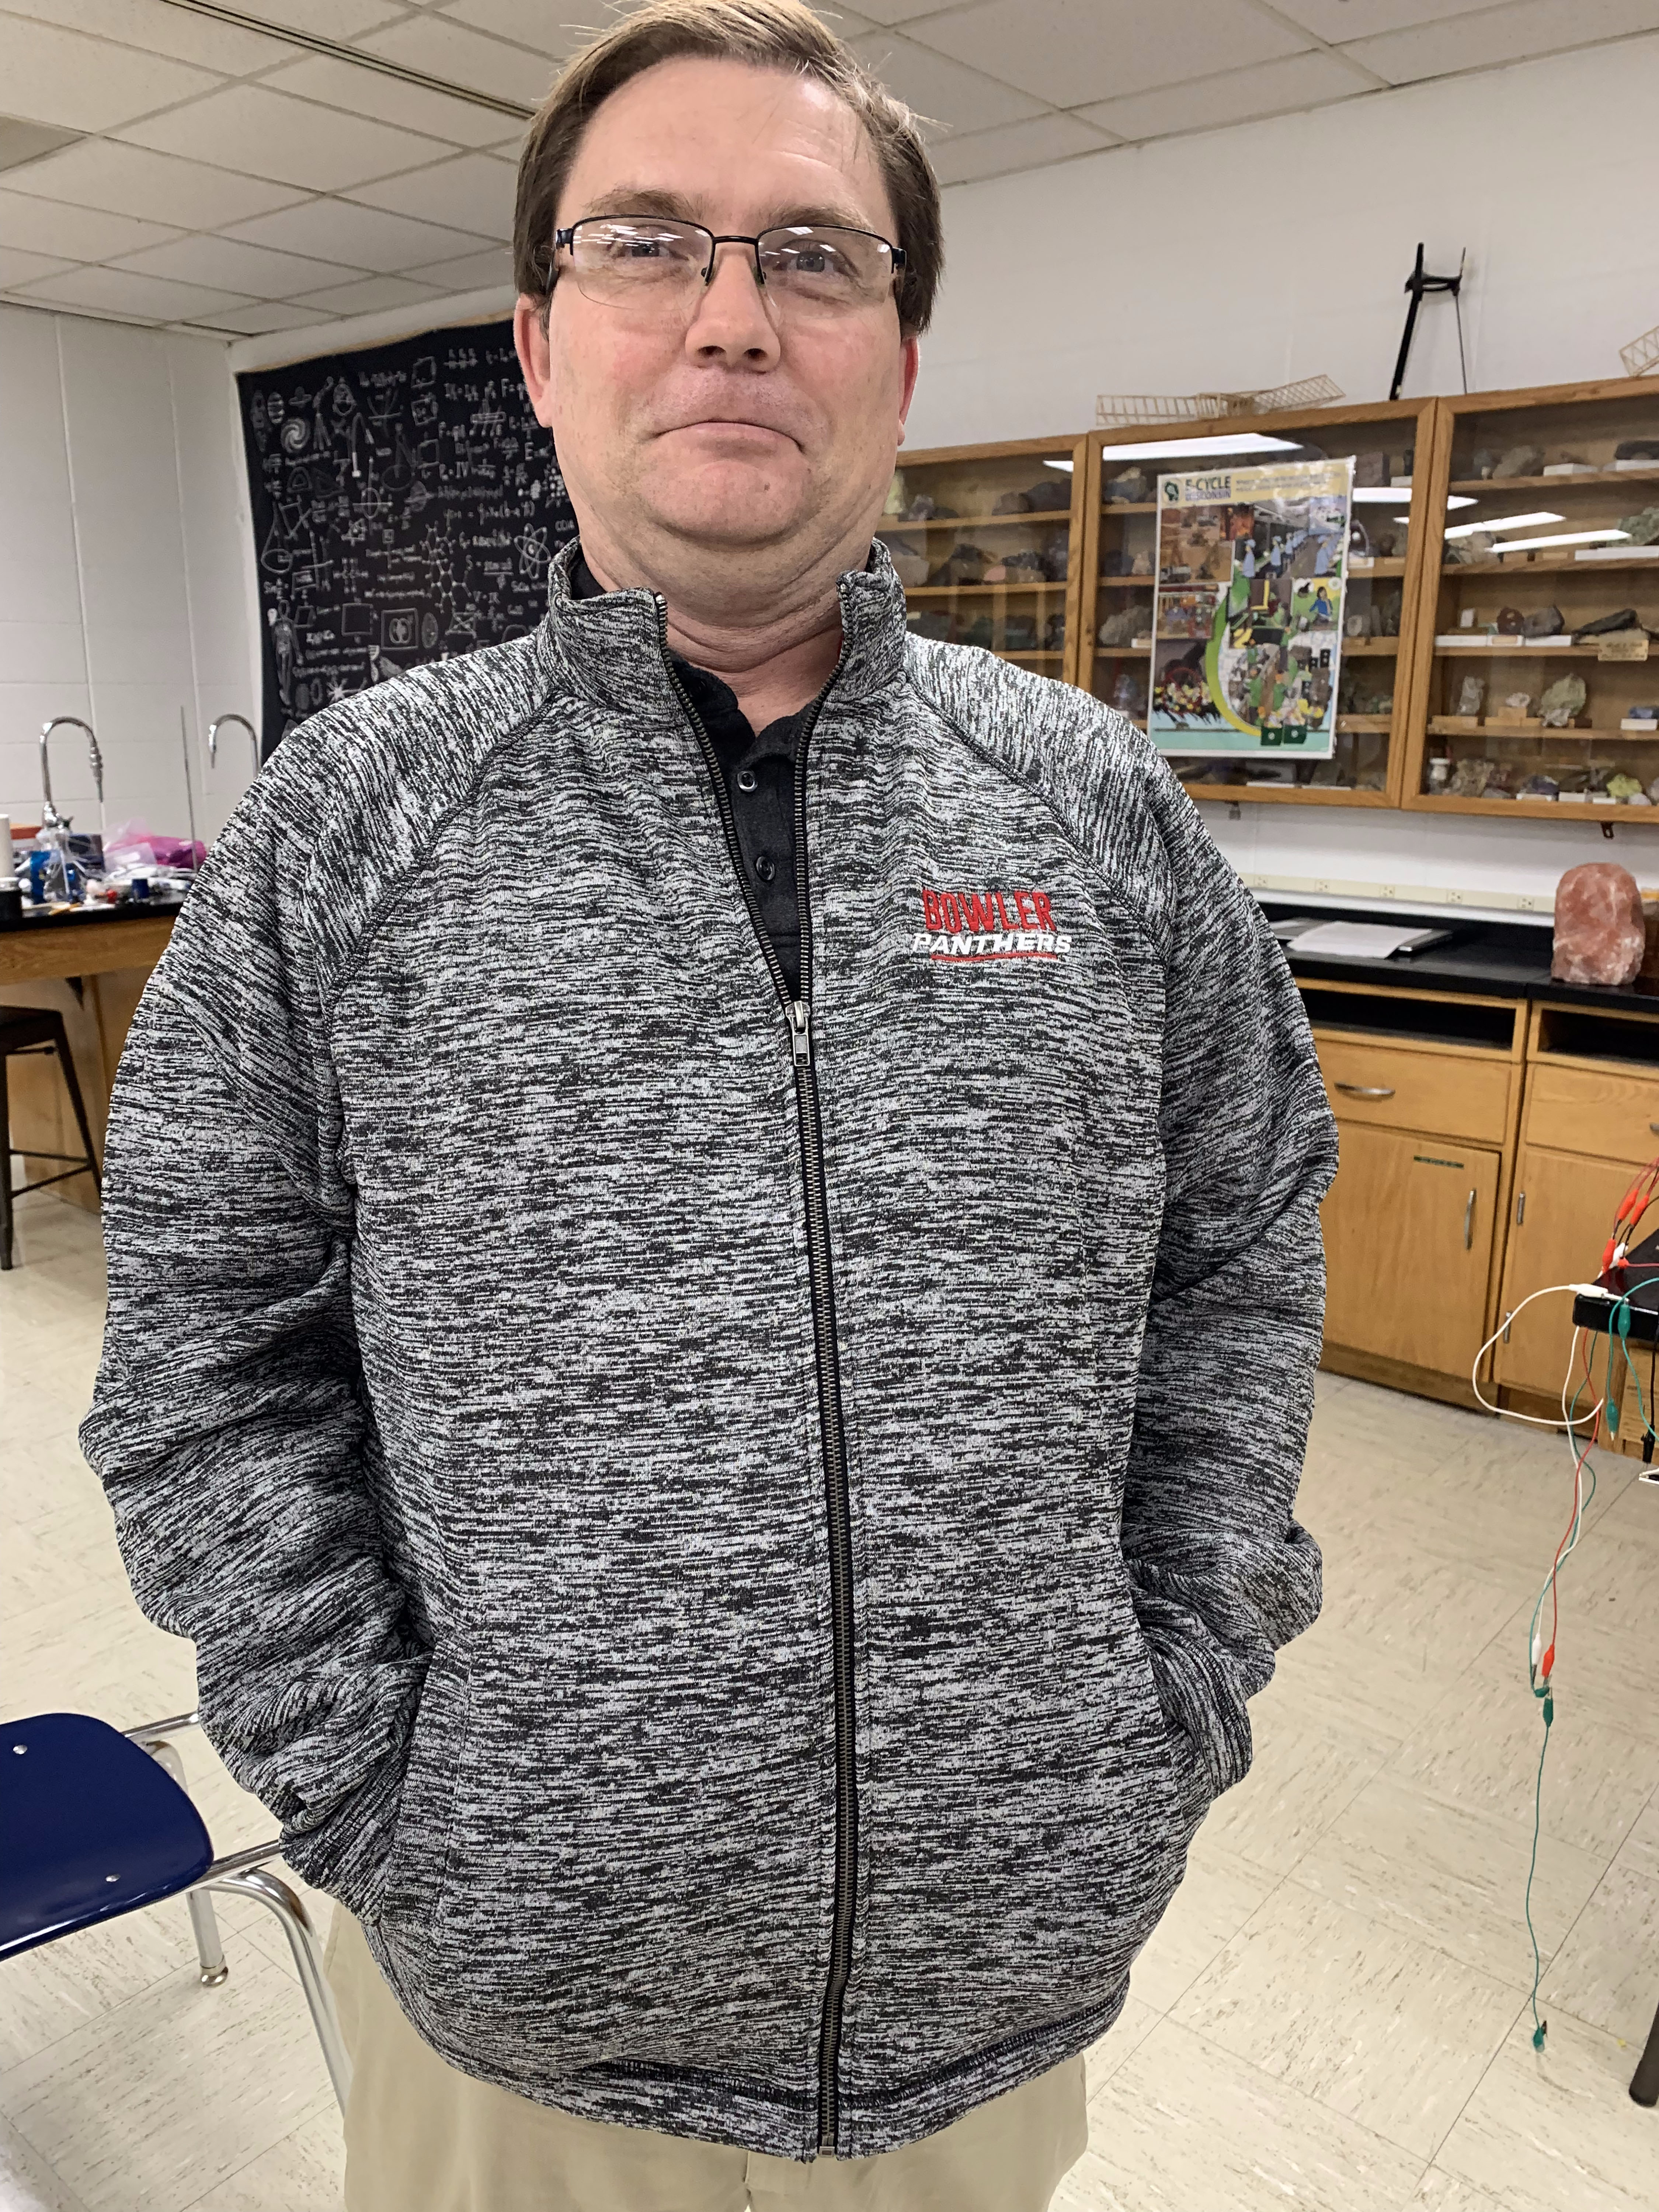 Mr. Curran in Zippered Jacket